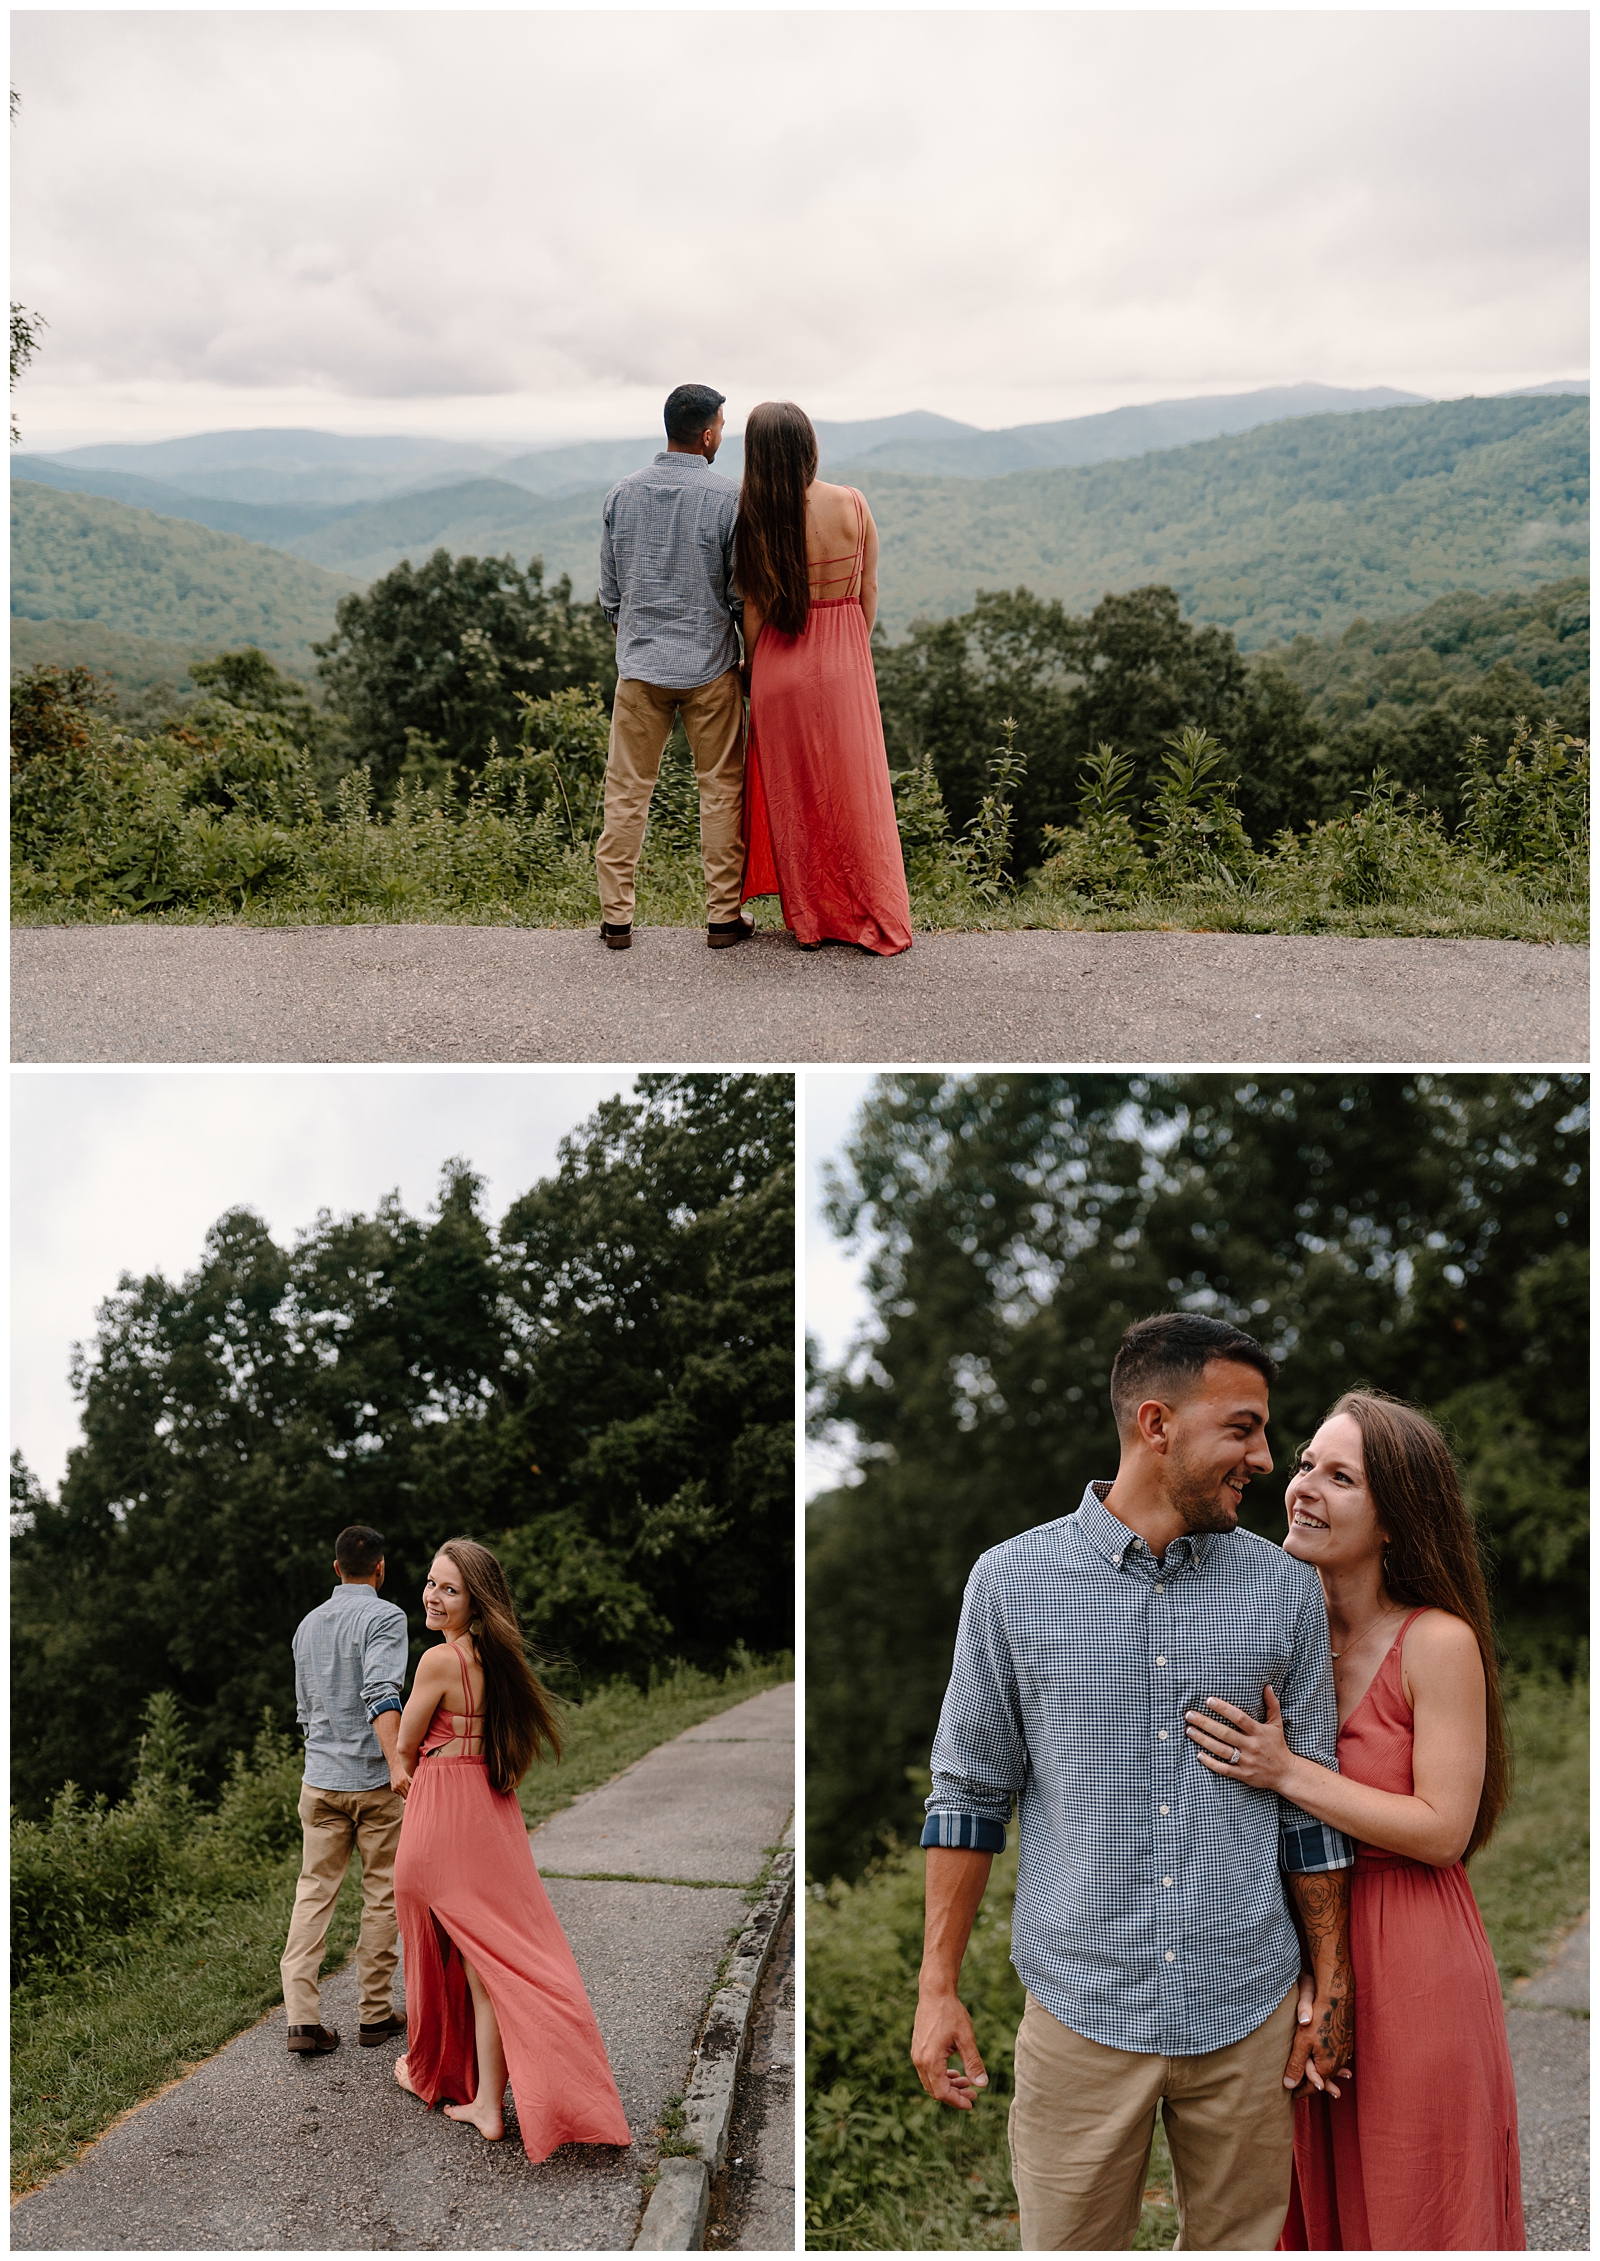 Engagement session along the Blue Ridge Parkway out side of Asheville, NC